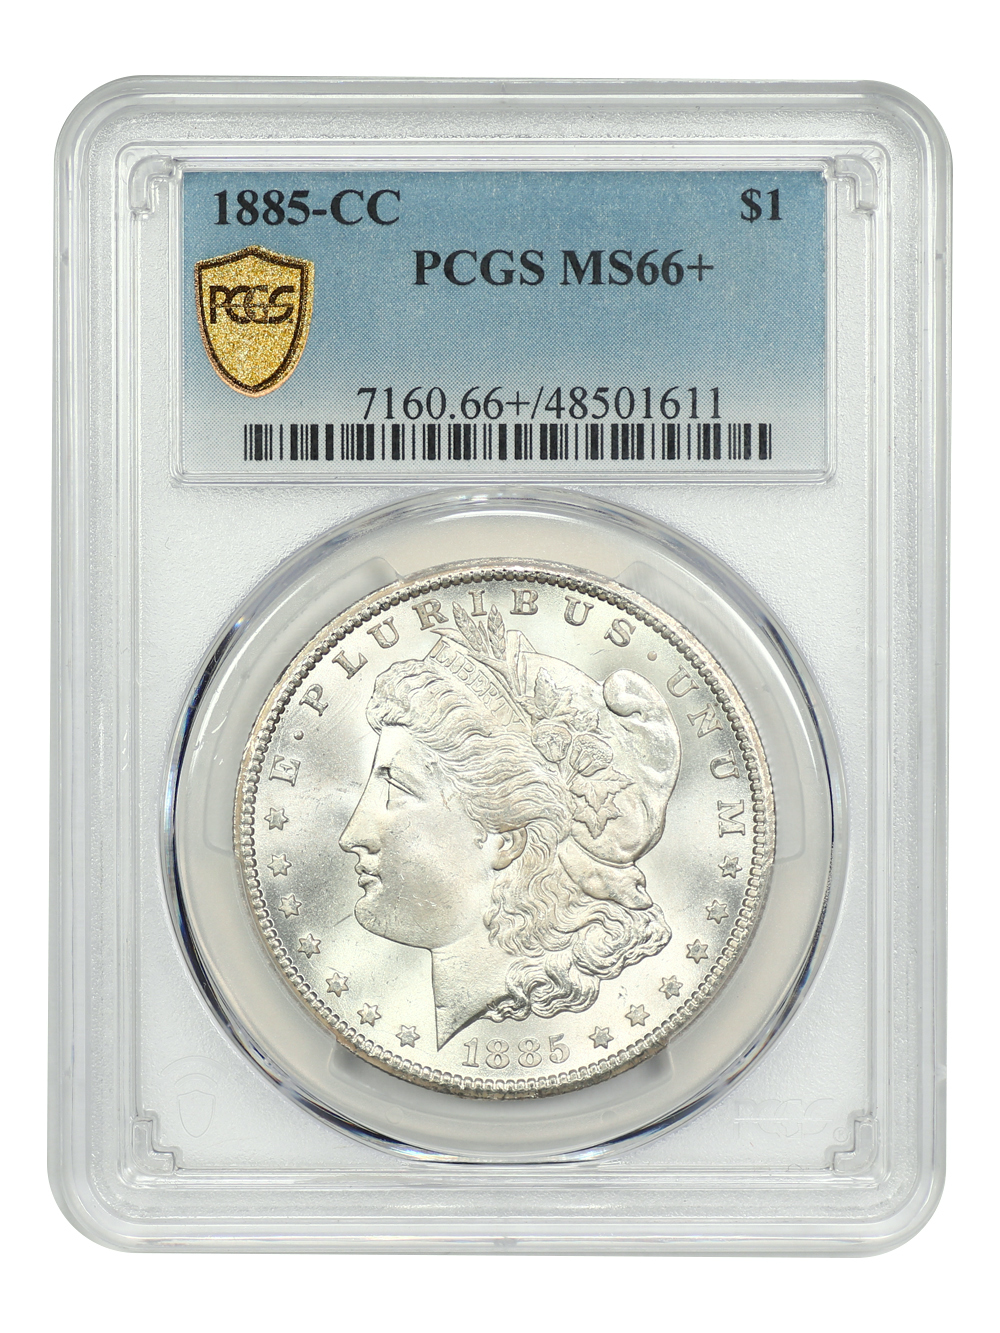 Primary image for 1885-CC $1 PCGS MS66